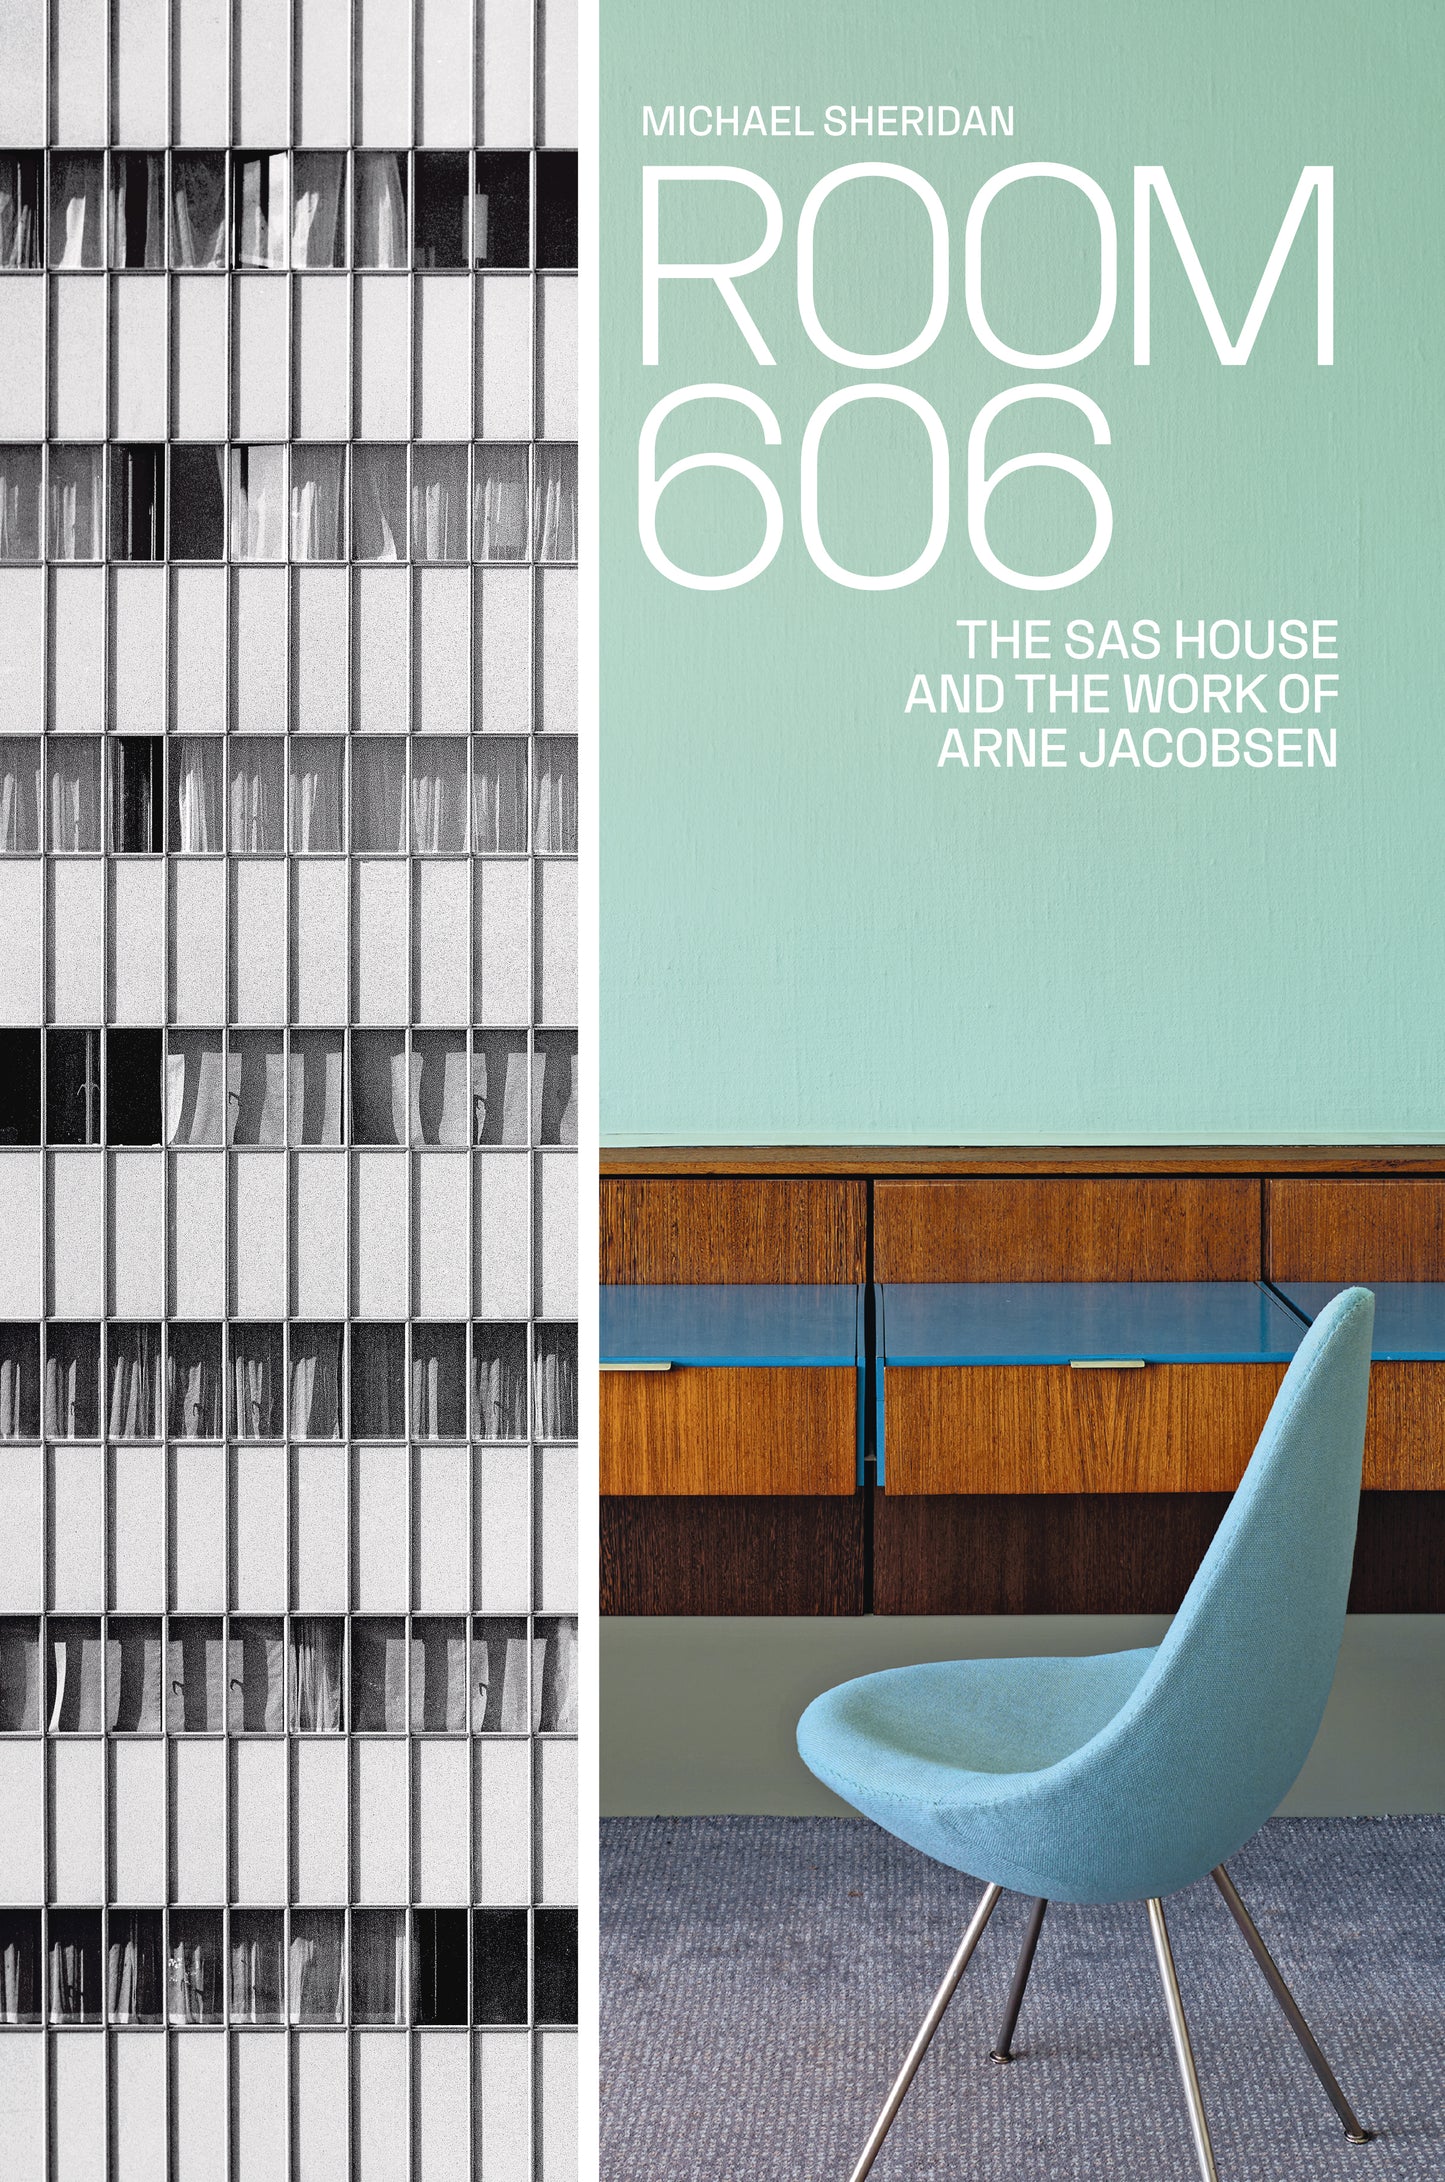 Room 606 – The SAS House and the Work of Arne Jacobsen